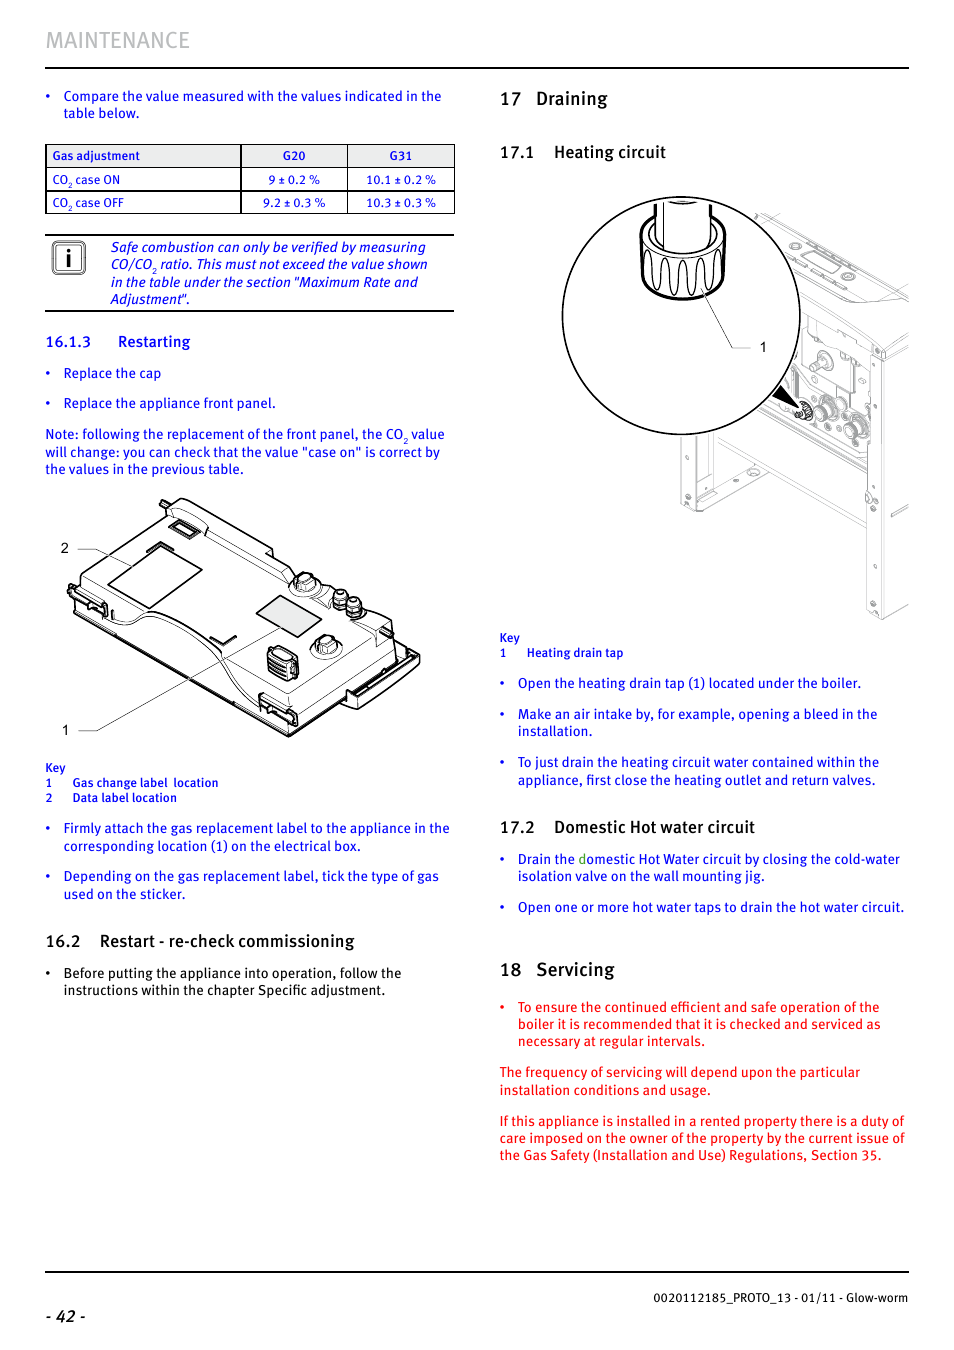 Maintenance, 17 draining, 18 servicing | Glow-worm Ultracom2 35 Store User Manual | Page 44 / 68